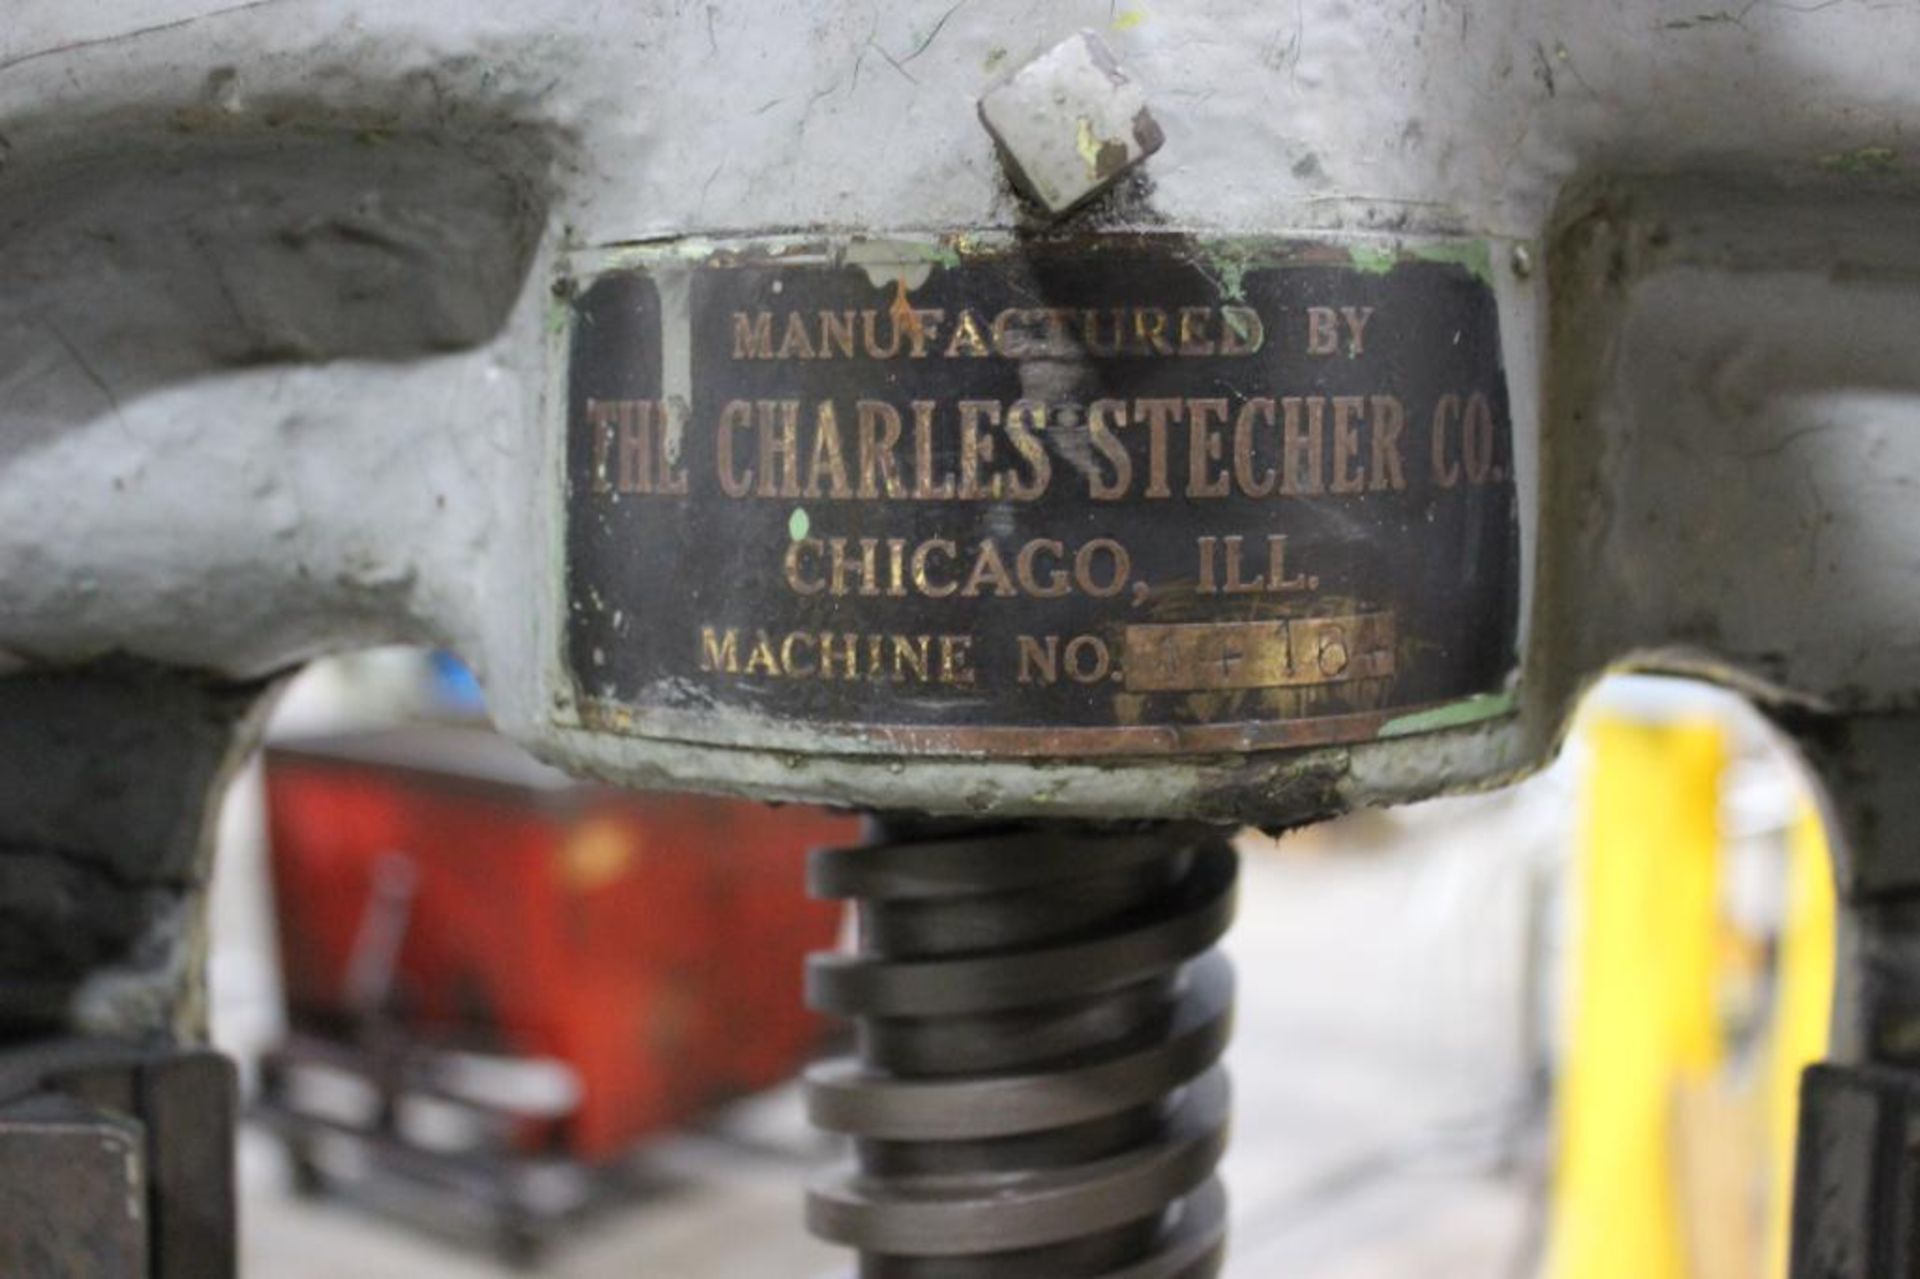 Charles Stecher Co. Screw Press S/N: 14164 - Image 4 of 4